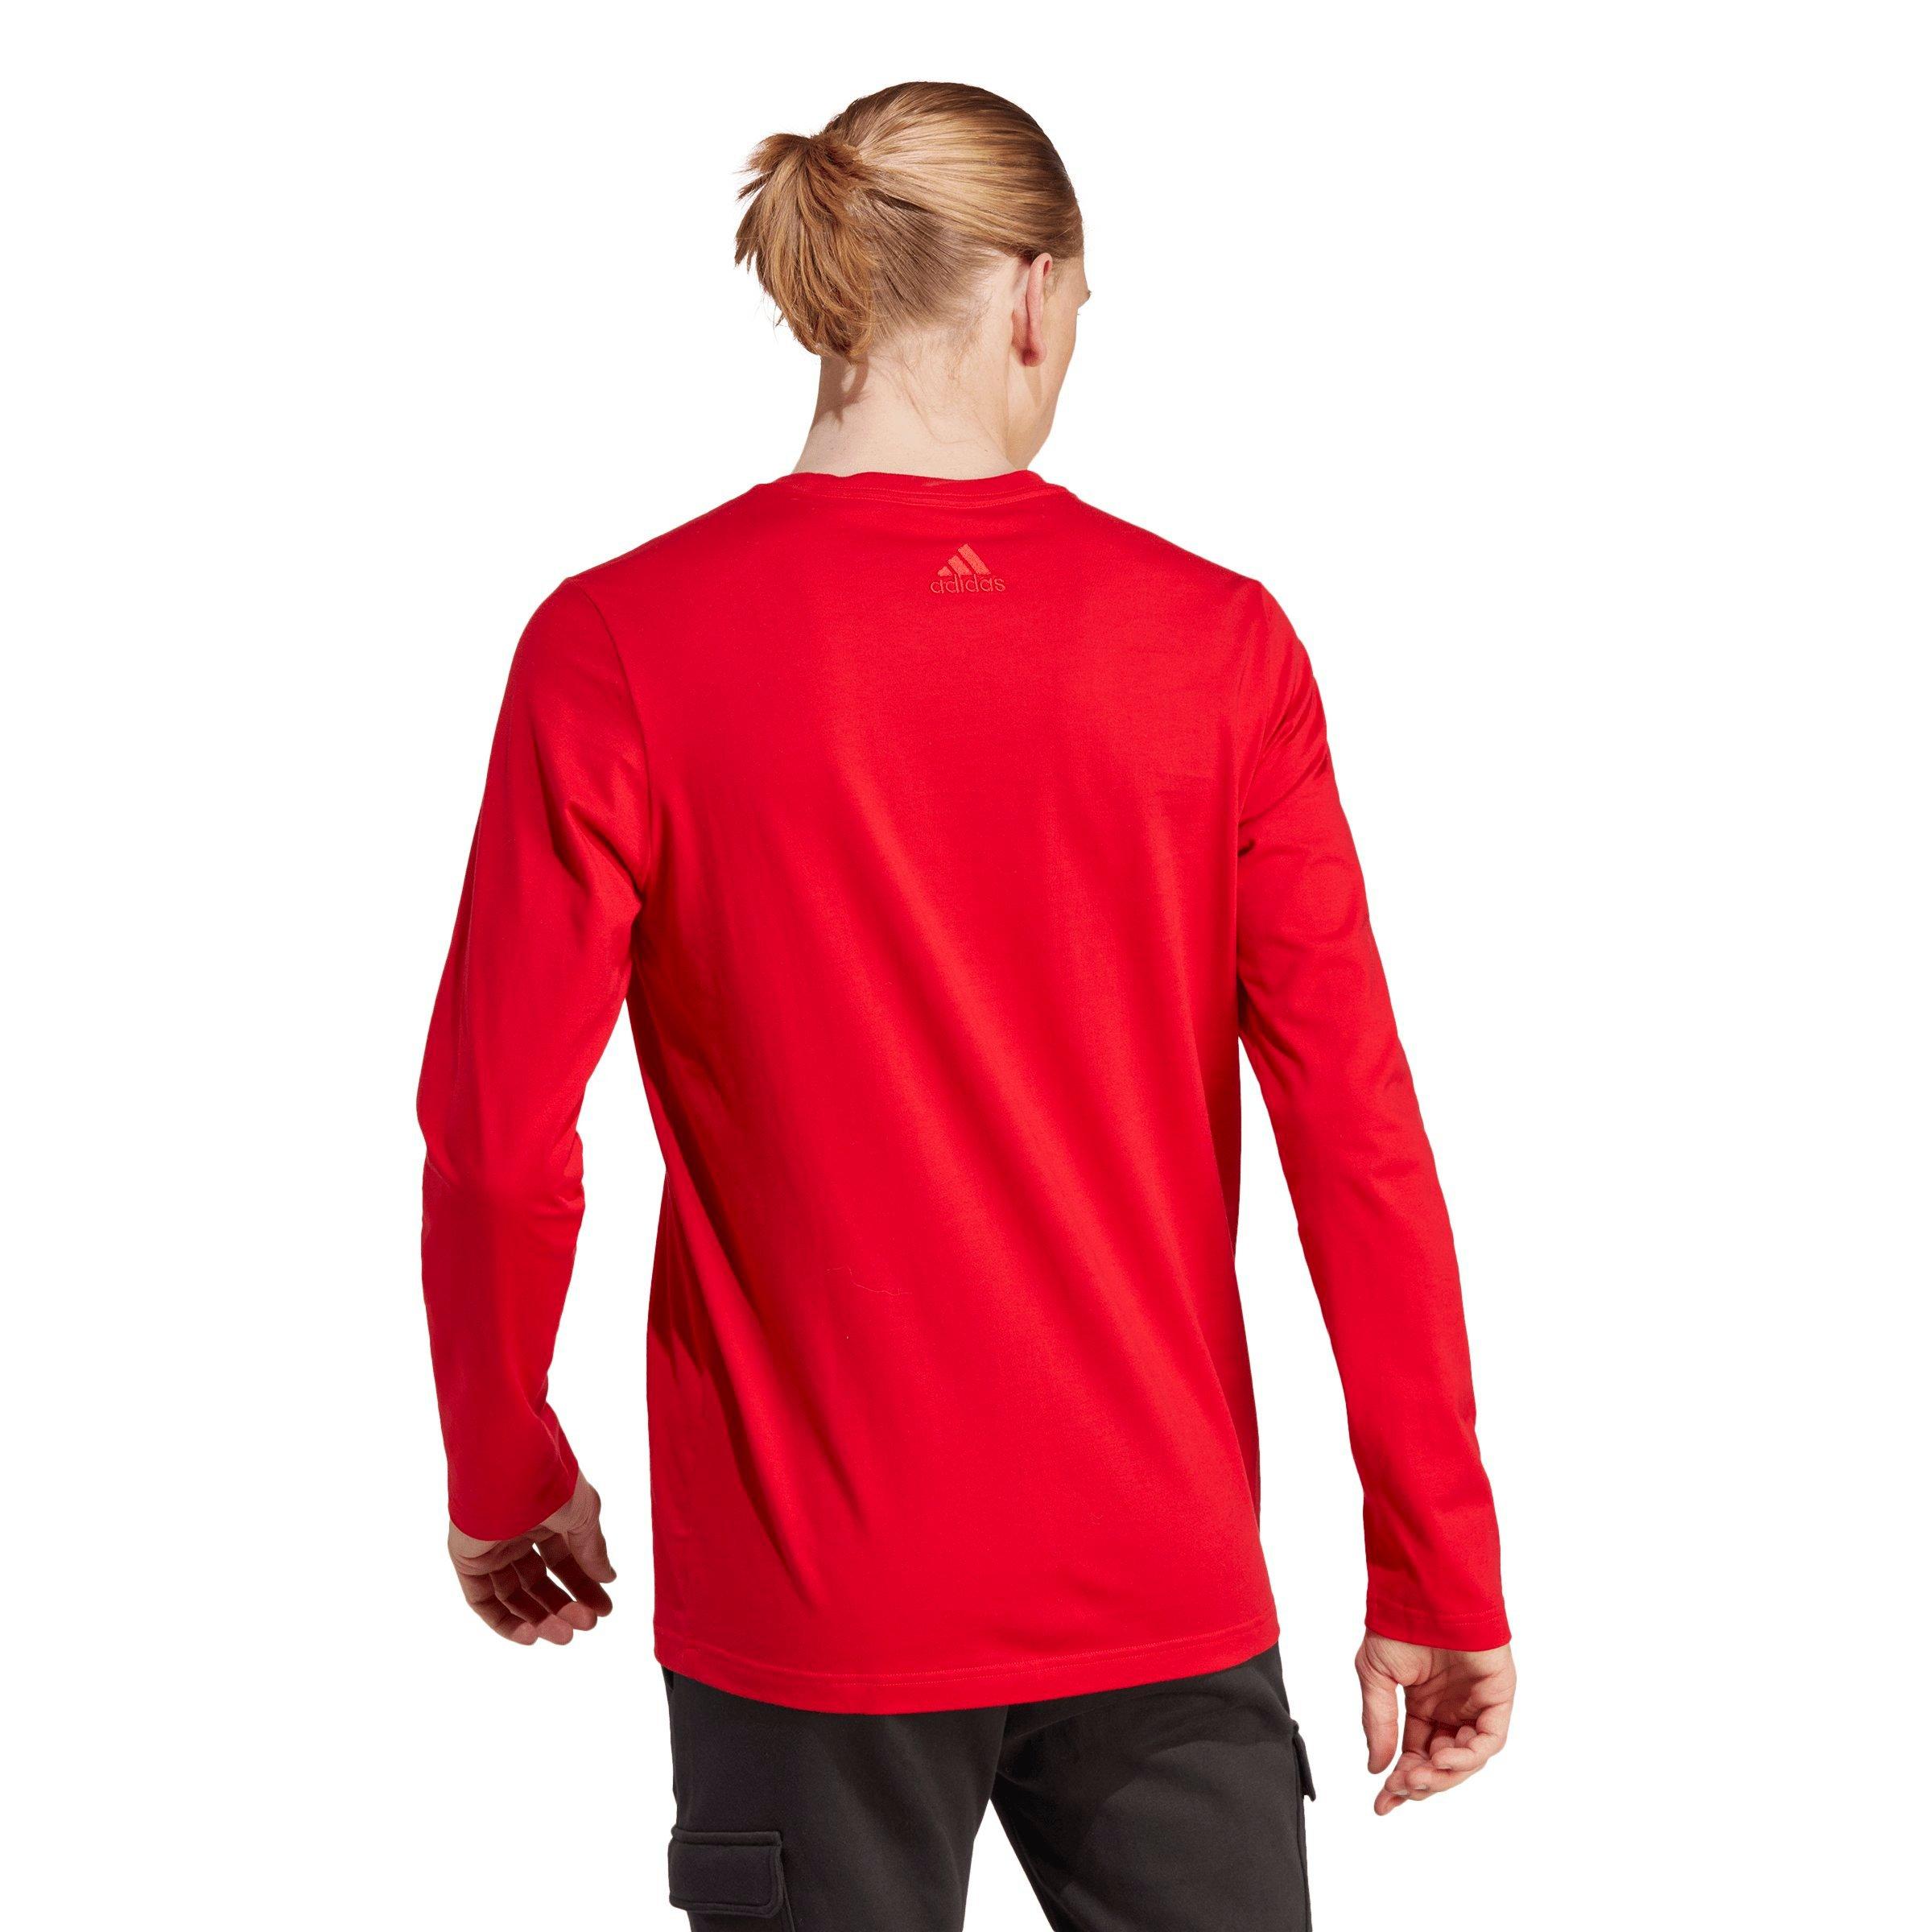 Essential GD Red Long Sleeve